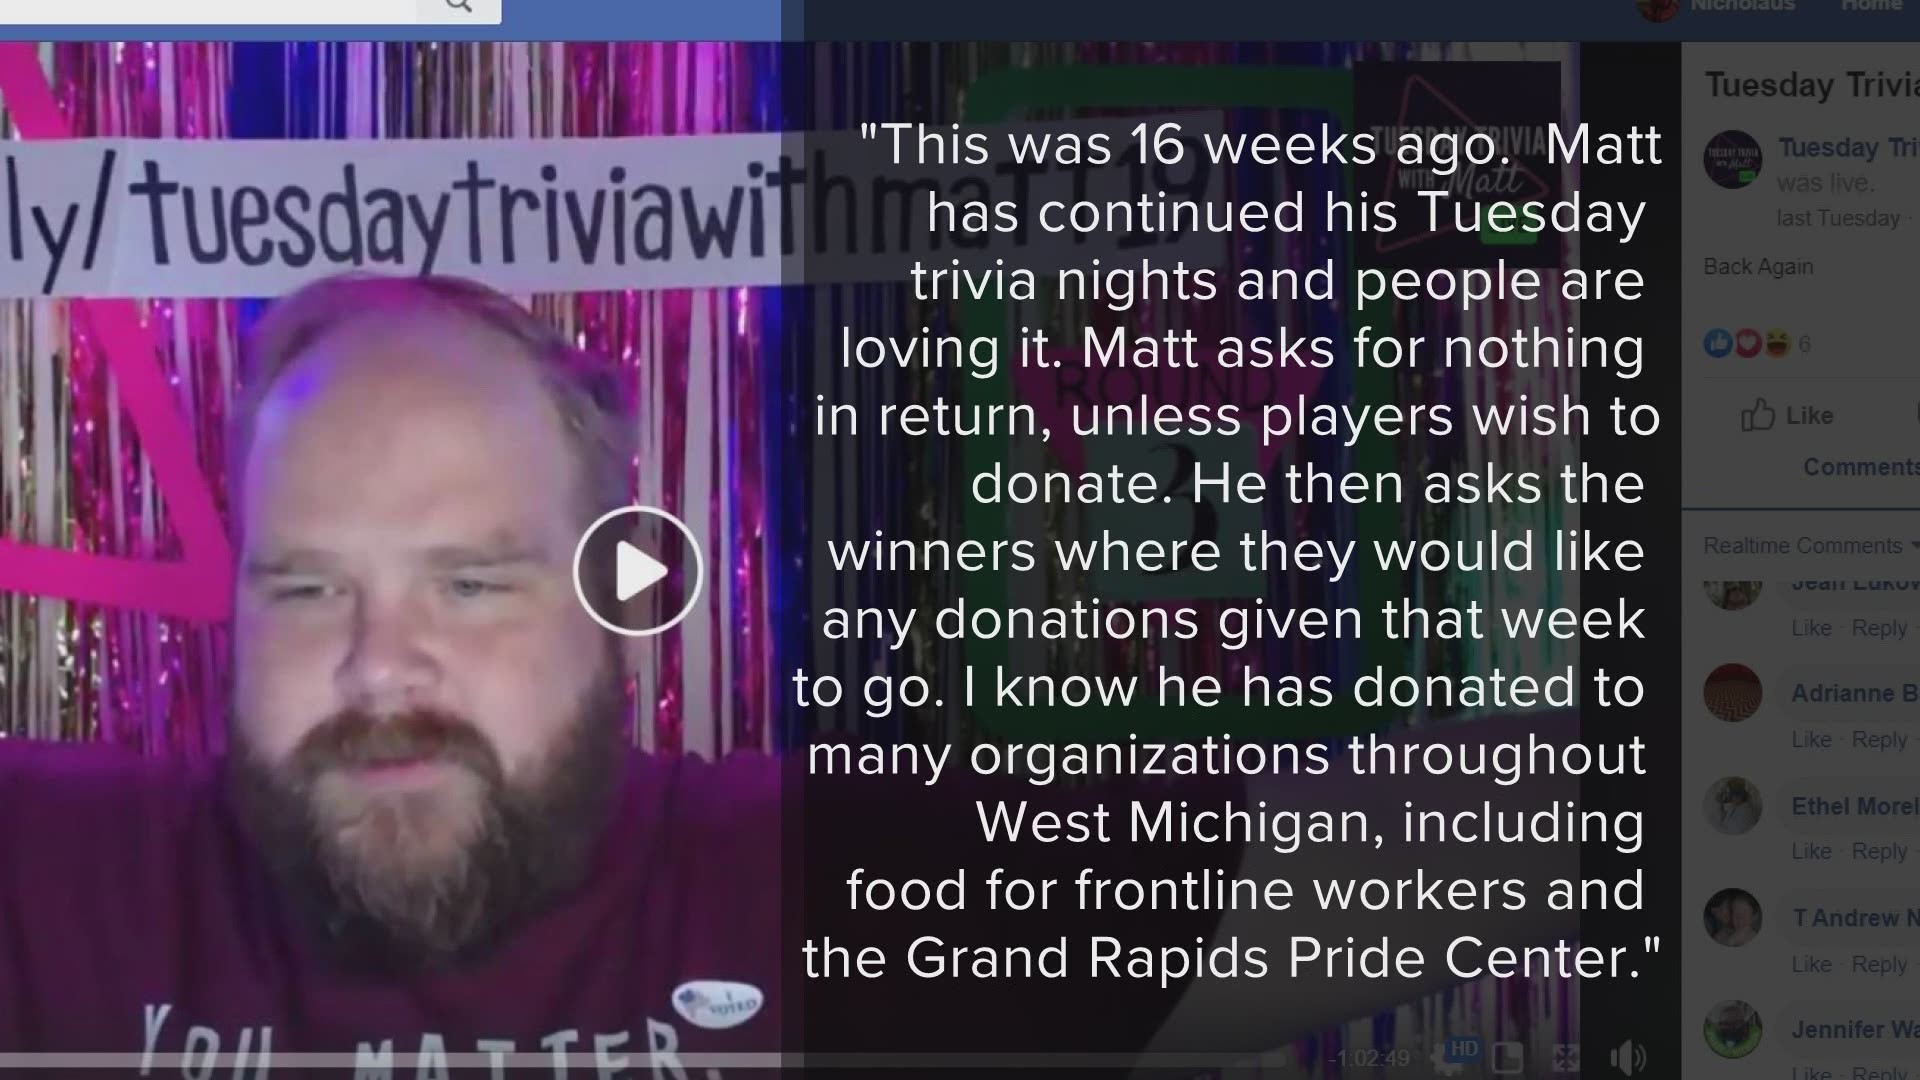 Matt created a trivia contest for people to connect and have some fun during a time when things looked quite bleak.